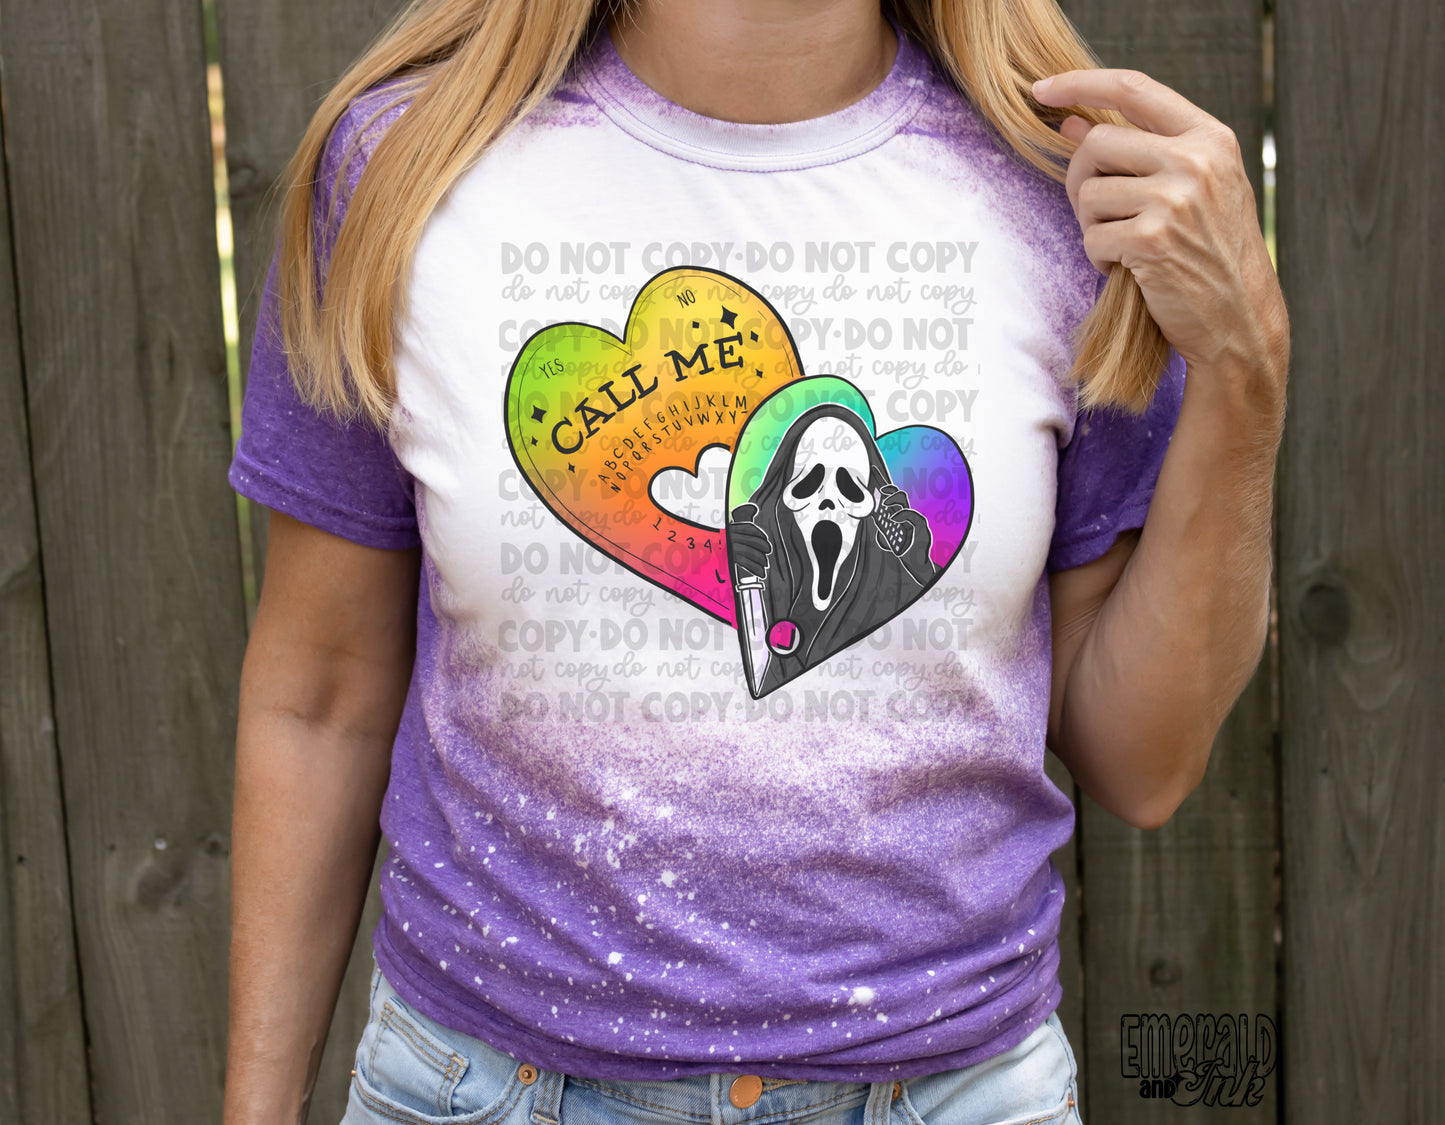 Call me rainbow - Adult Size Sublimation Transfer